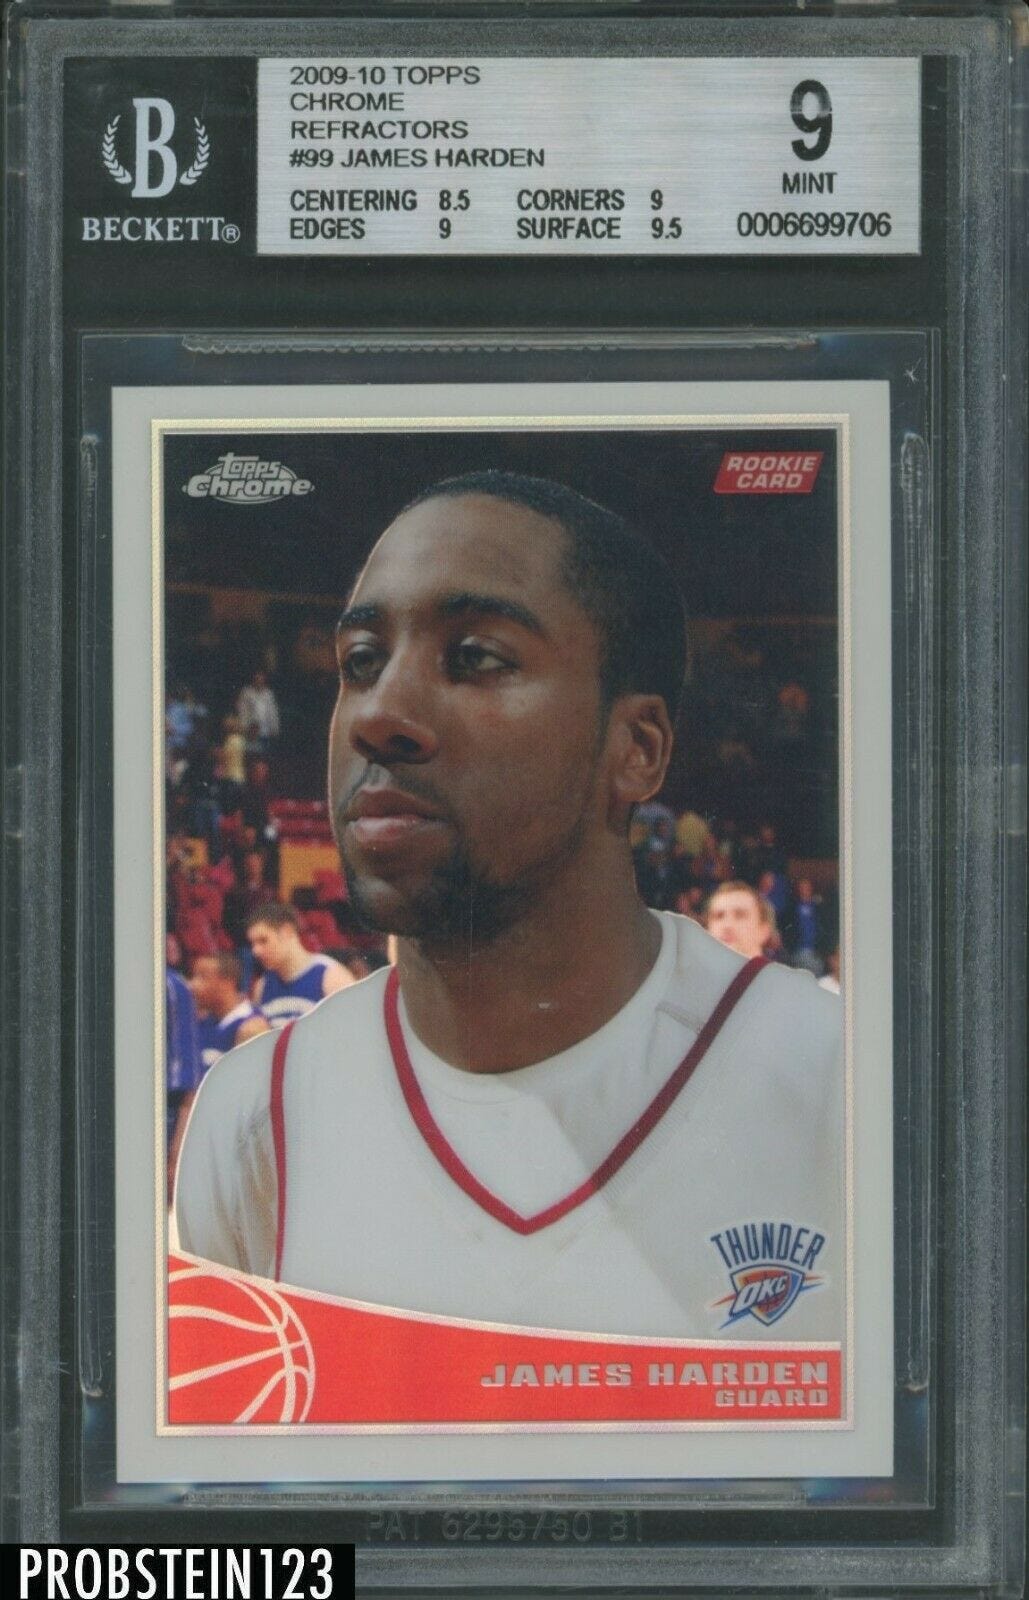 Image 1 - 2009-10-Topps-Chrome-Refractor-99-James-Harden-RC-Rookie-500-BGS-9-w-9-5